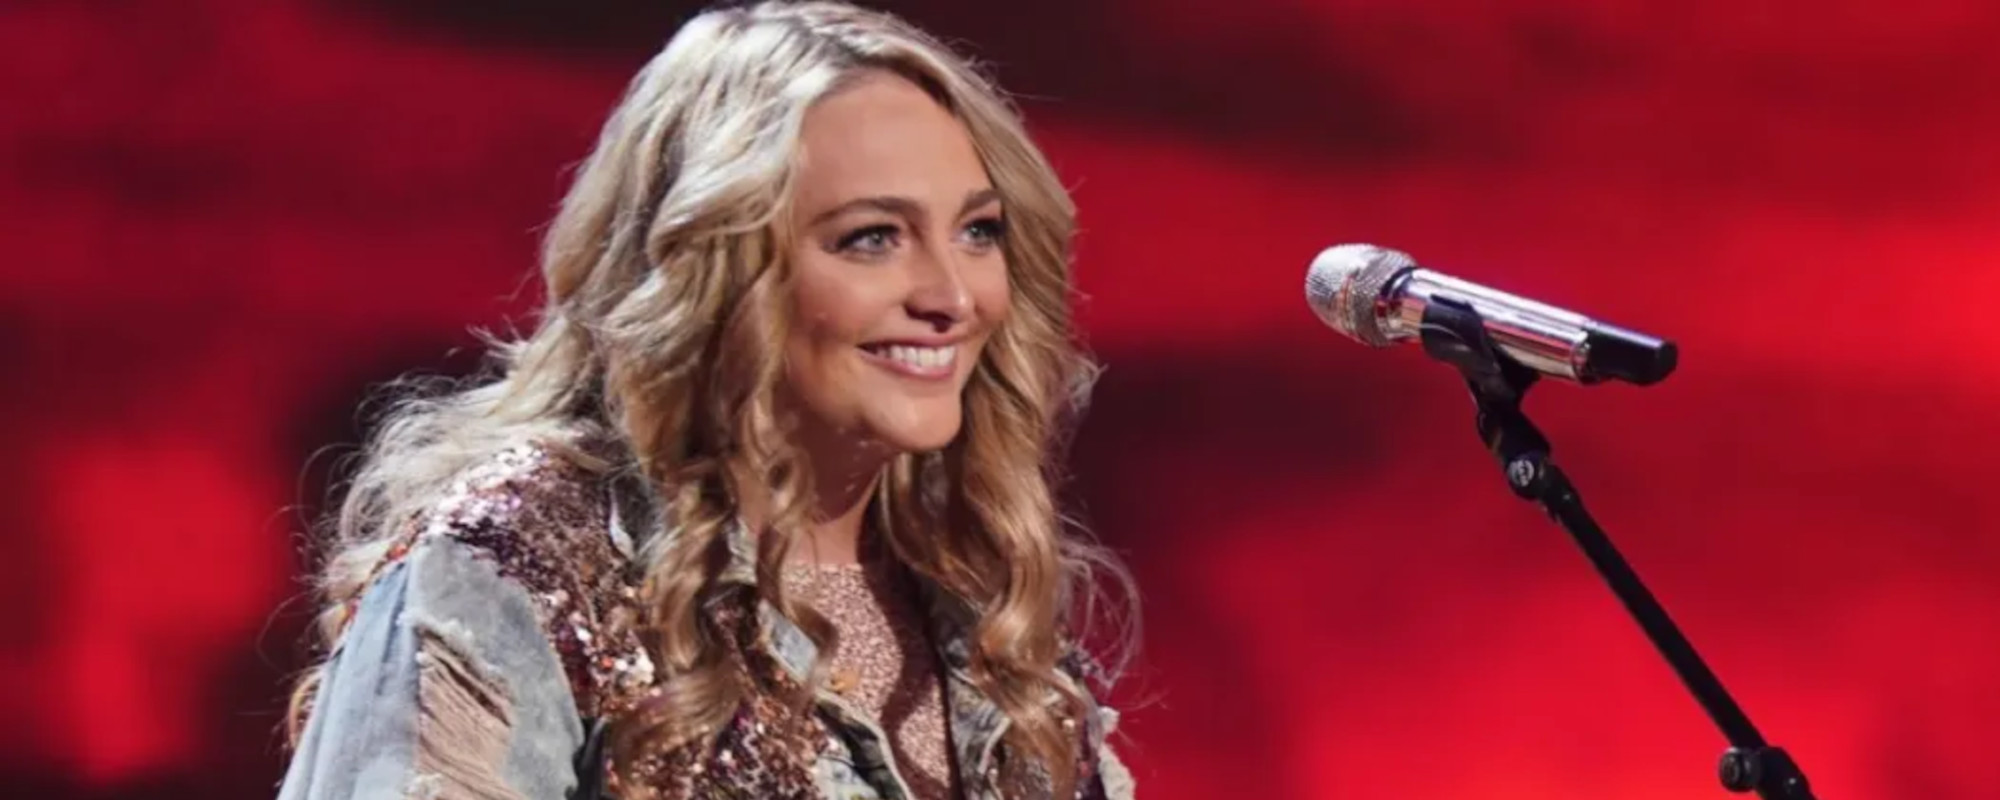 Huntergirl Wows Judges with Original Song “Heartbreak Down” on ‘American Idol’